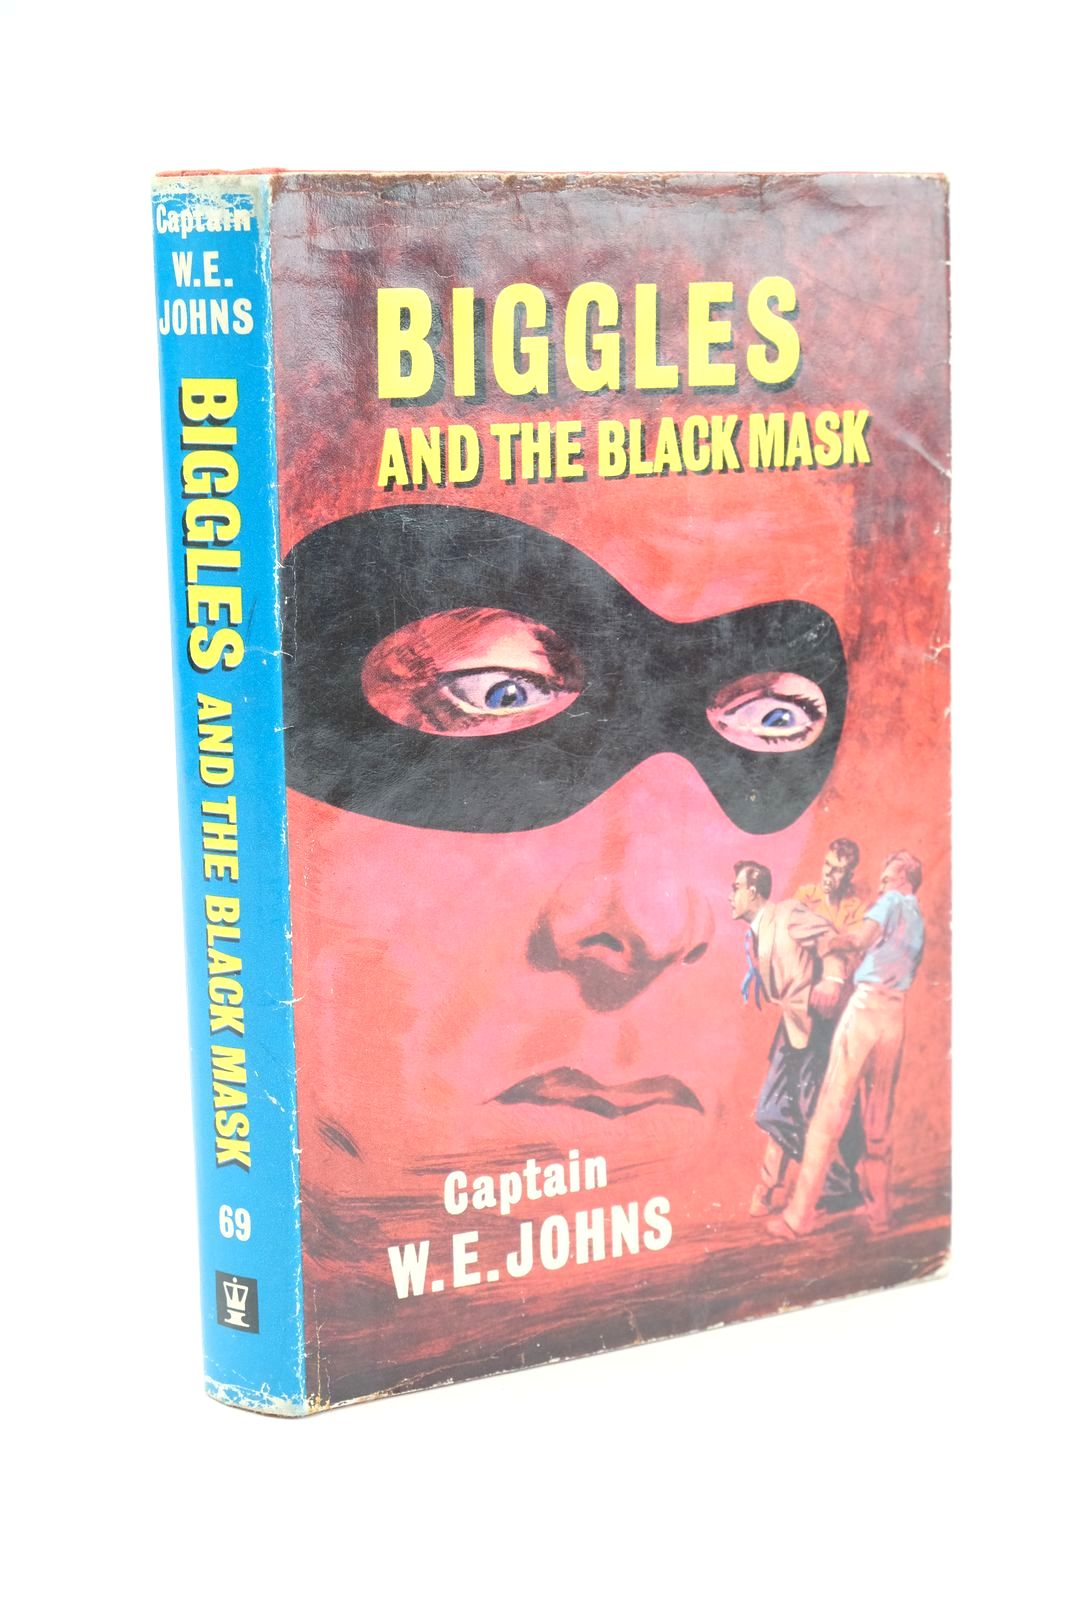 Photo of BIGGLES AND THE BLACK MASK written by Johns, W.E. illustrated by Stead,  published by Hodder & Stoughton (STOCK CODE: 1323928)  for sale by Stella & Rose's Books